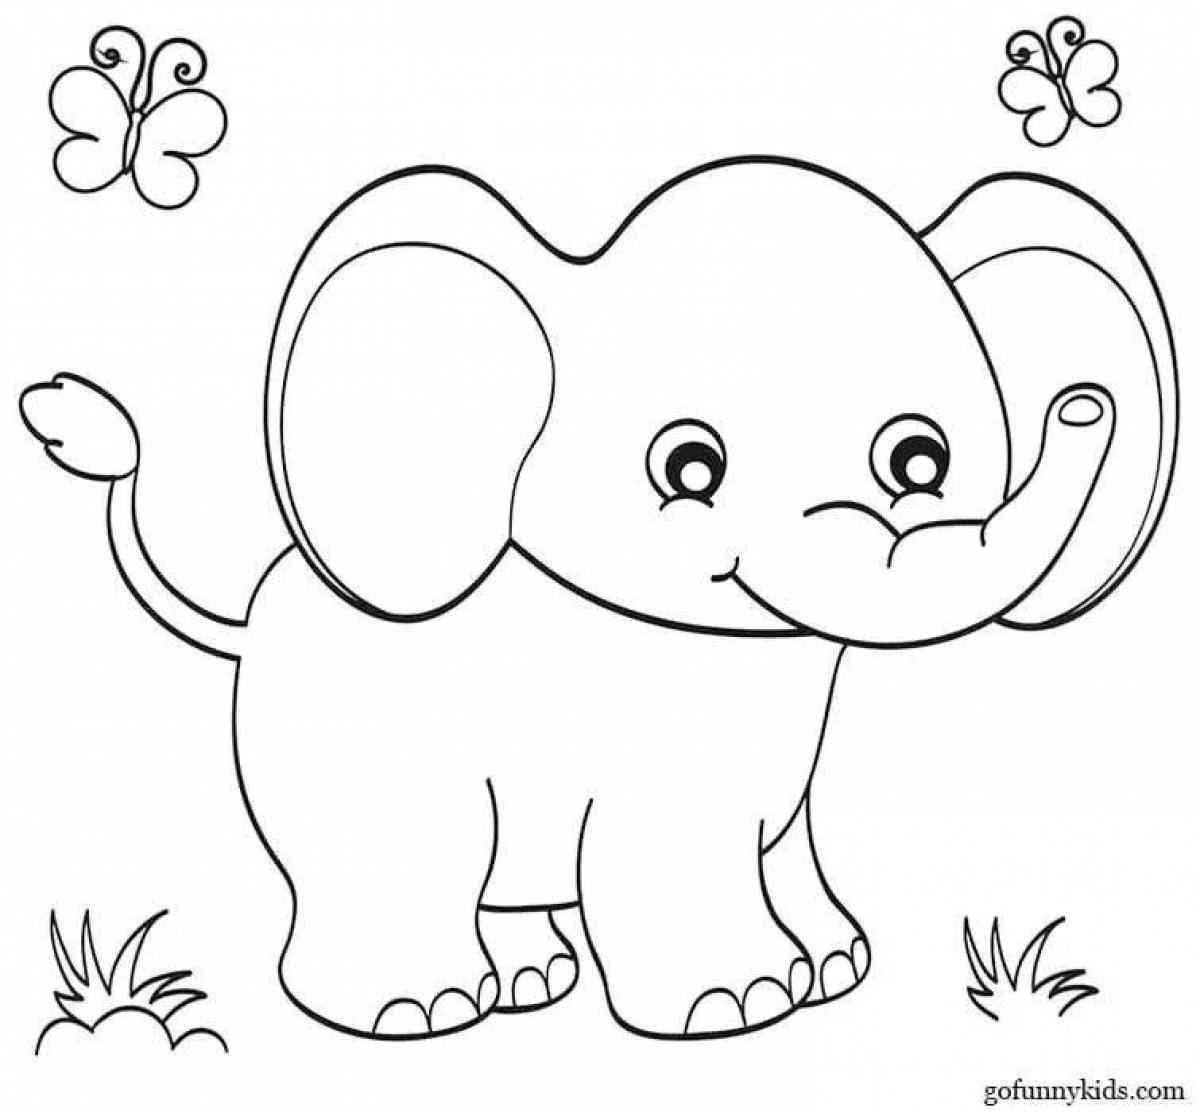 Playful animal coloring for 3-4 year olds